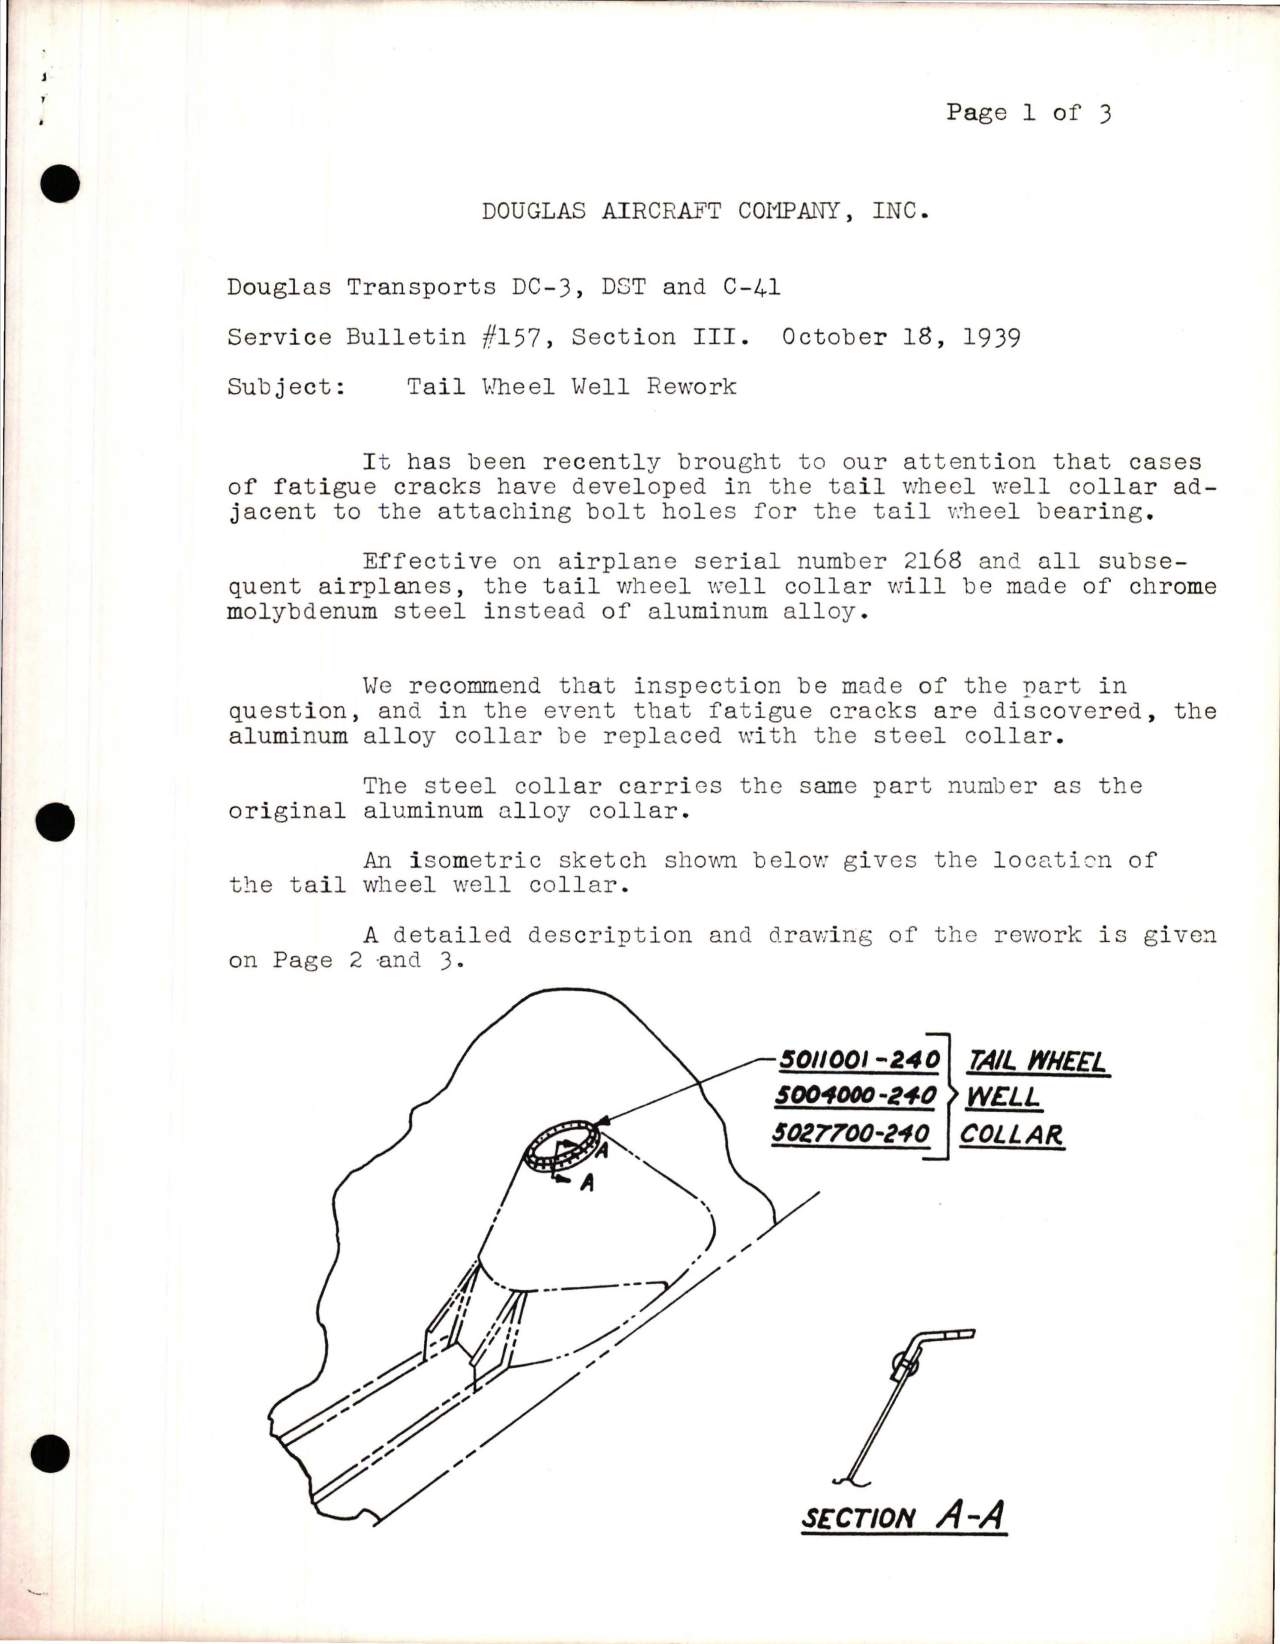 Sample page 1 from AirCorps Library document: Tail Wheel Well Rework